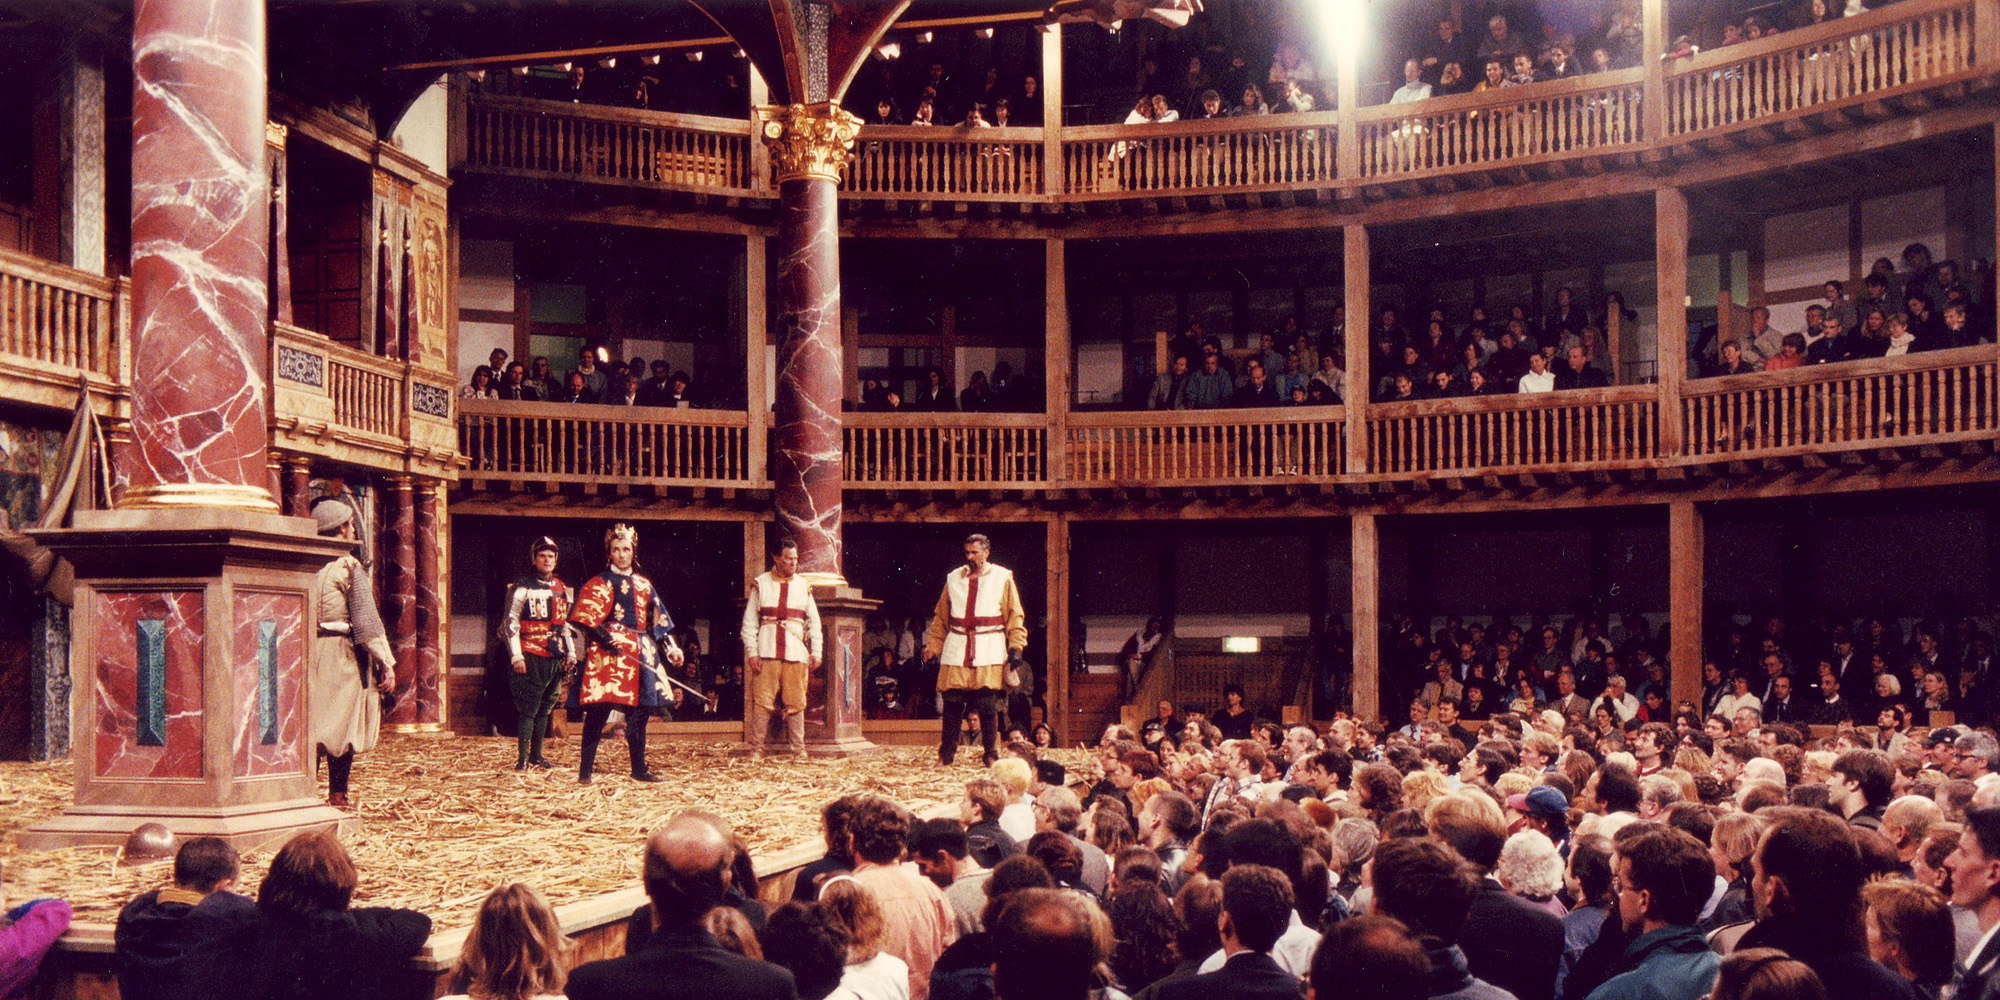 A large crowd of audience members stand watching a play in a circular timber structure.